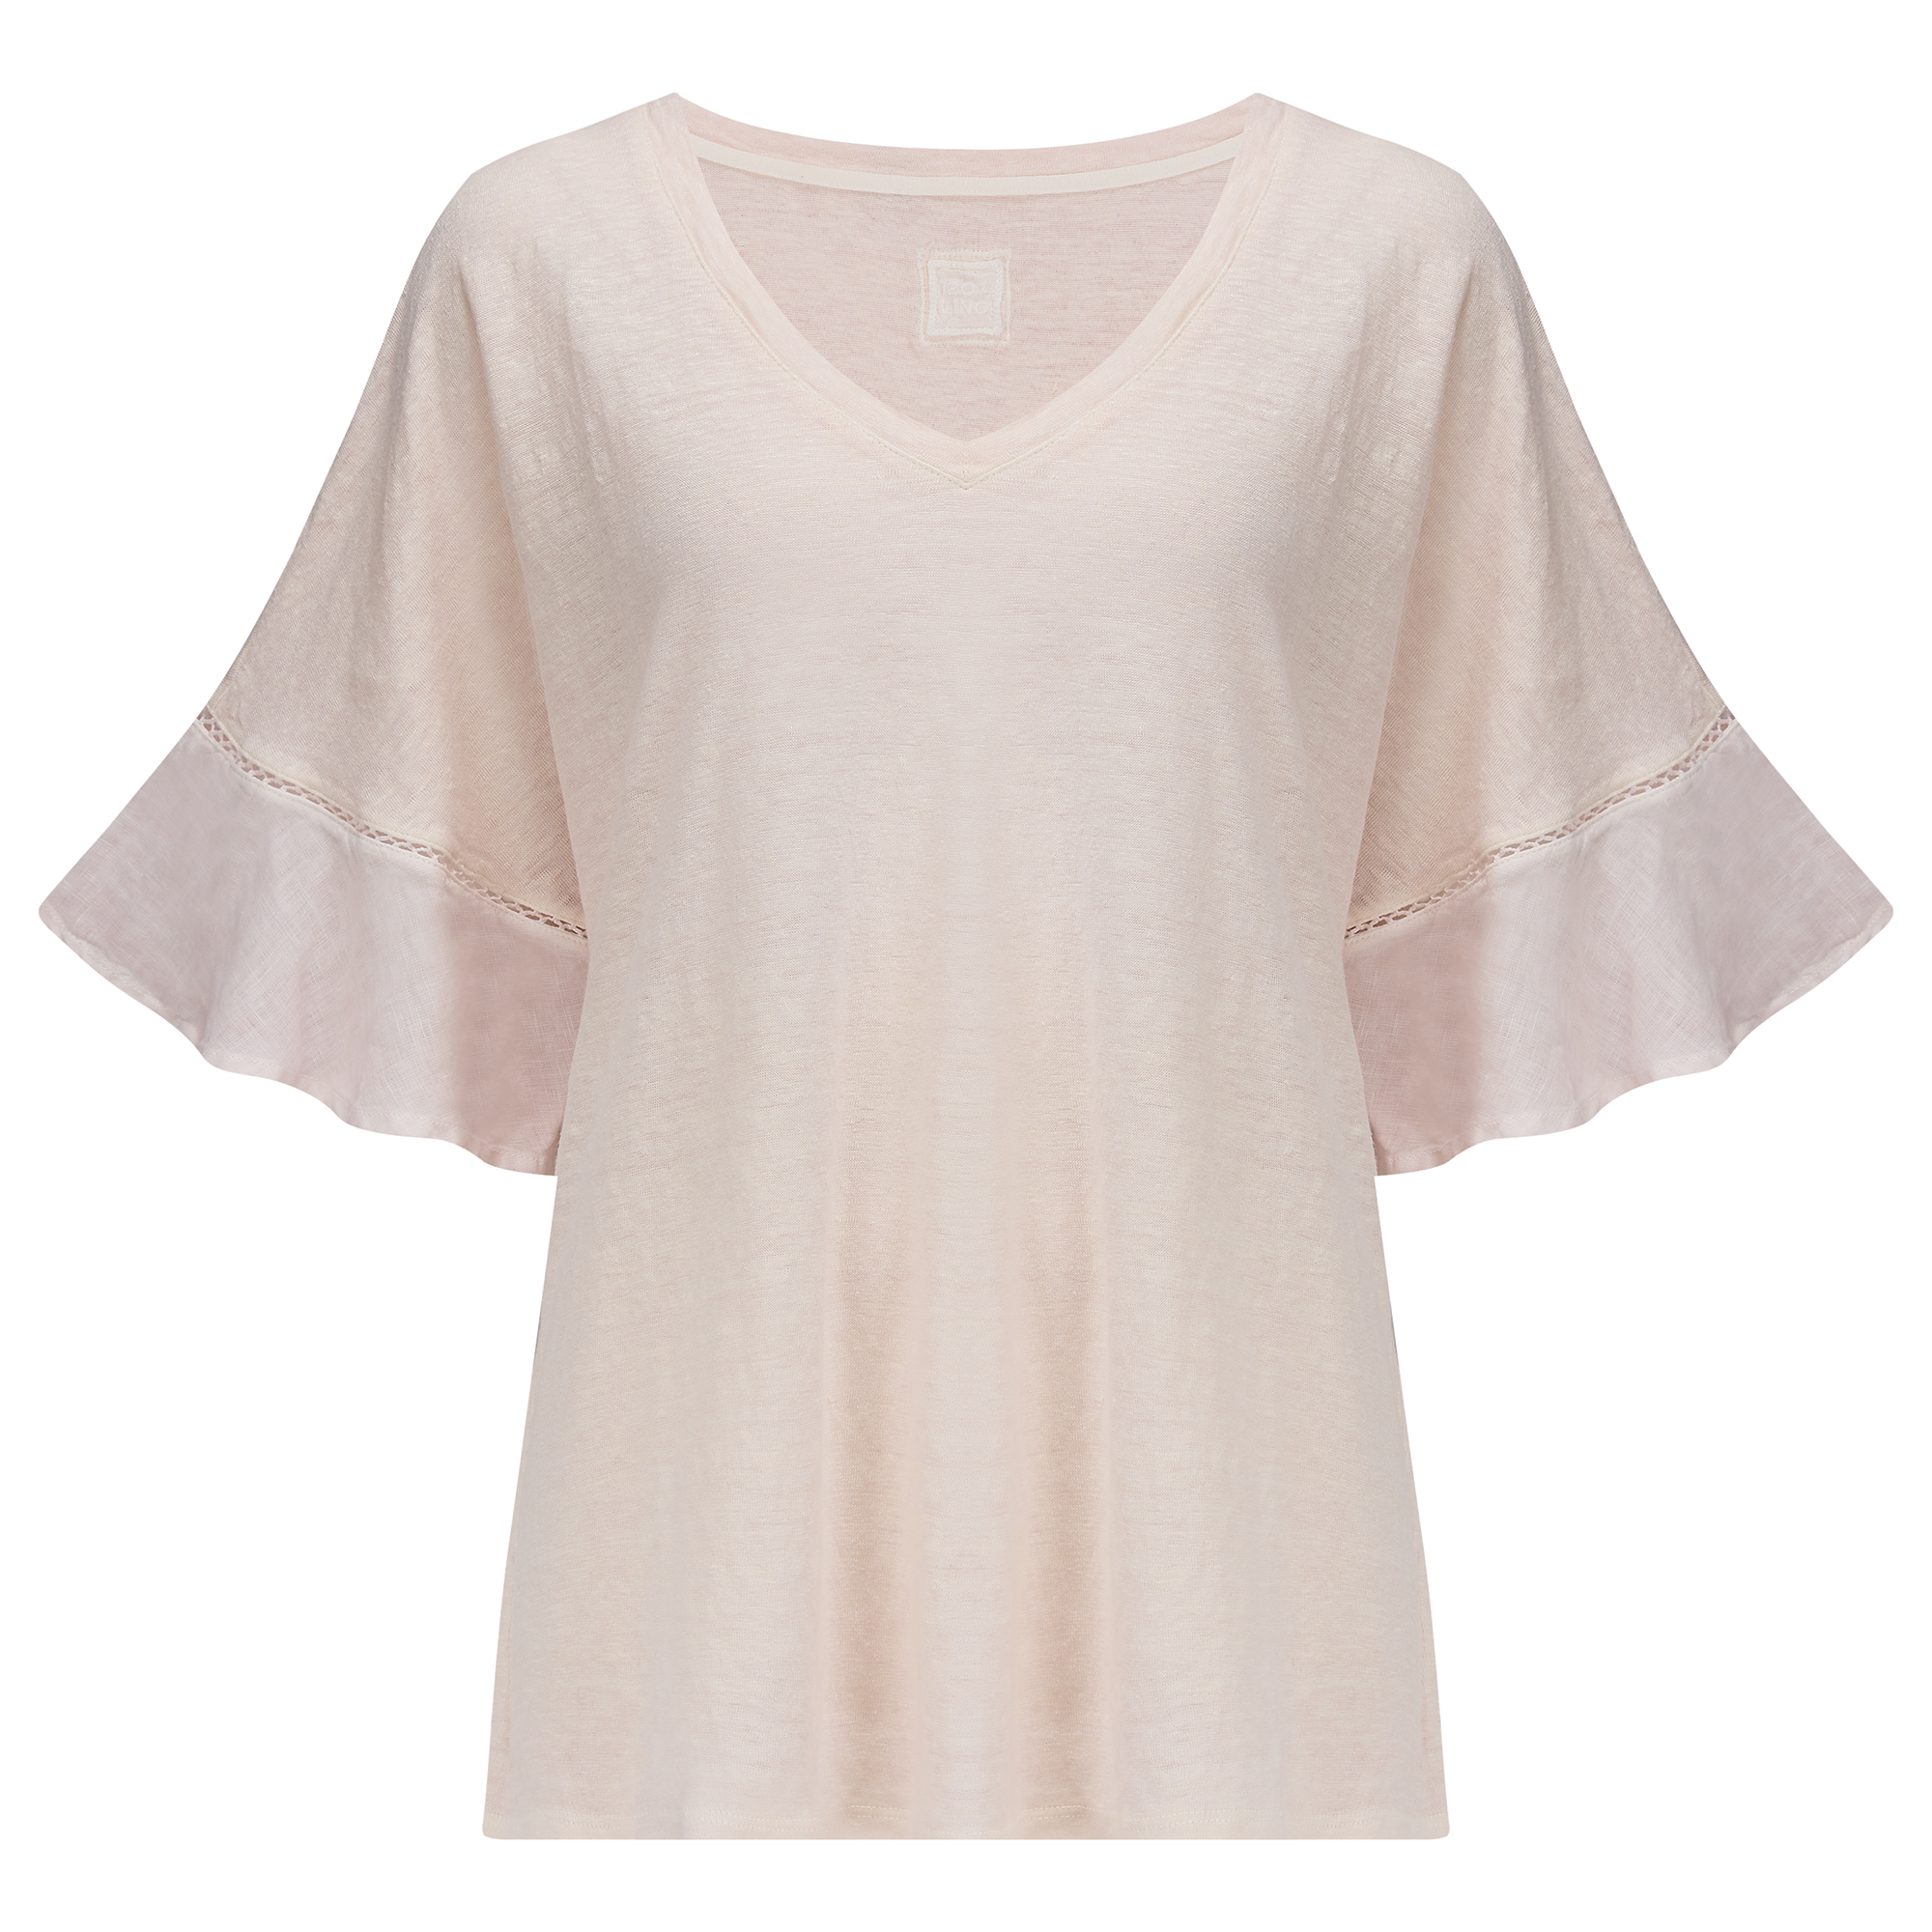 120% Lino Jersey Linen Frill Sleeve Top in Rose Soft Fade